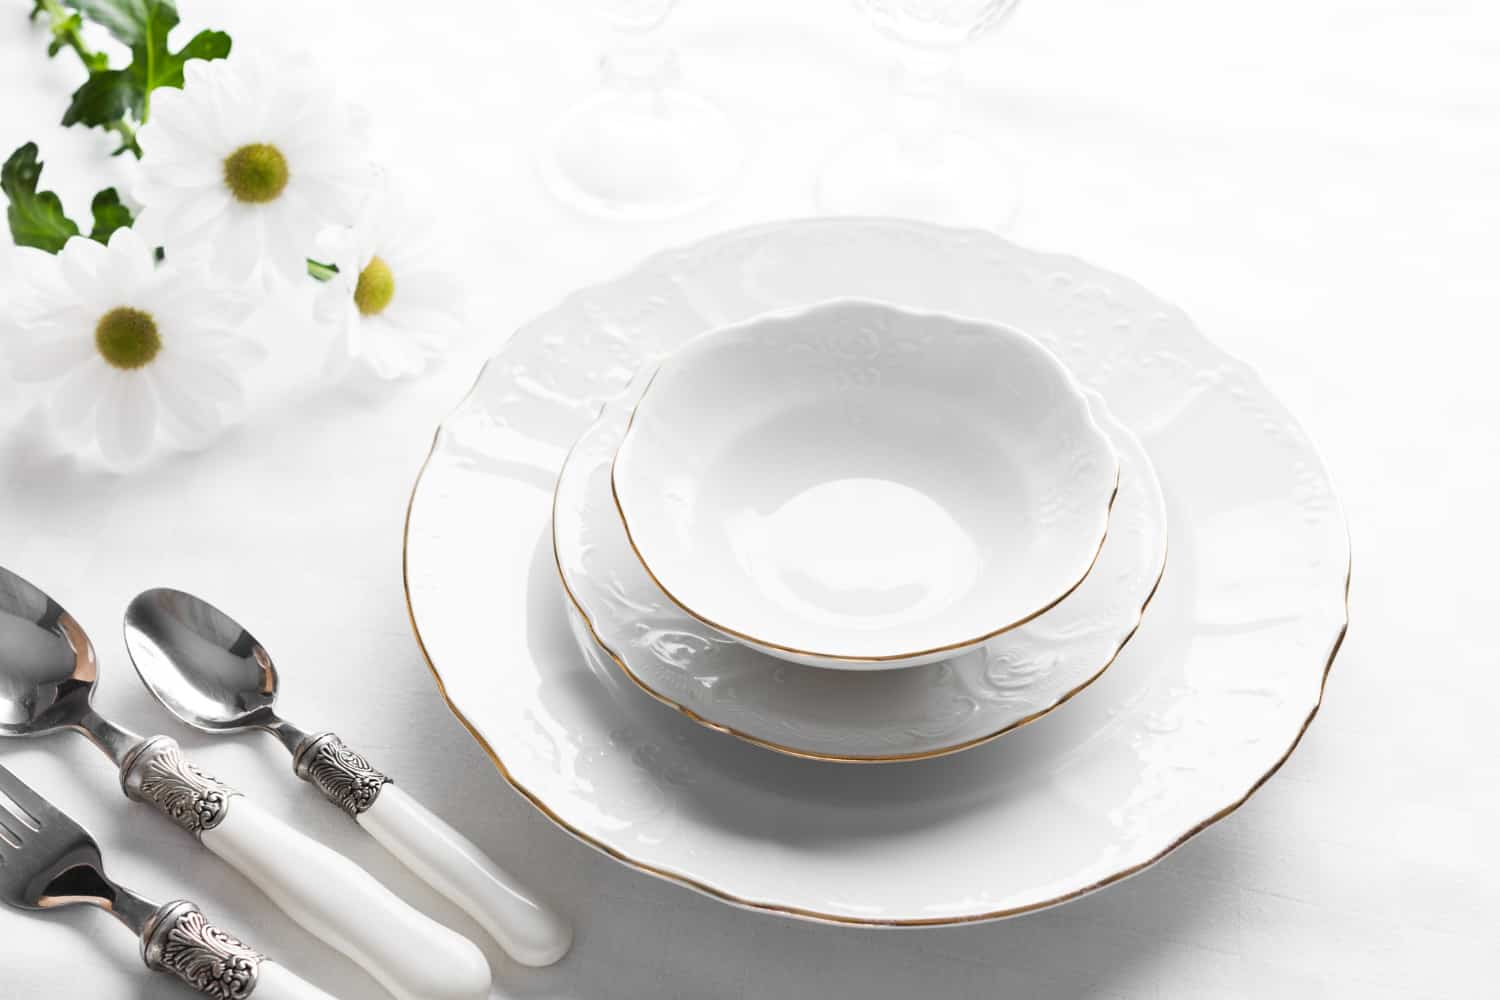 Tableware for a new apartment – what will come in handy?